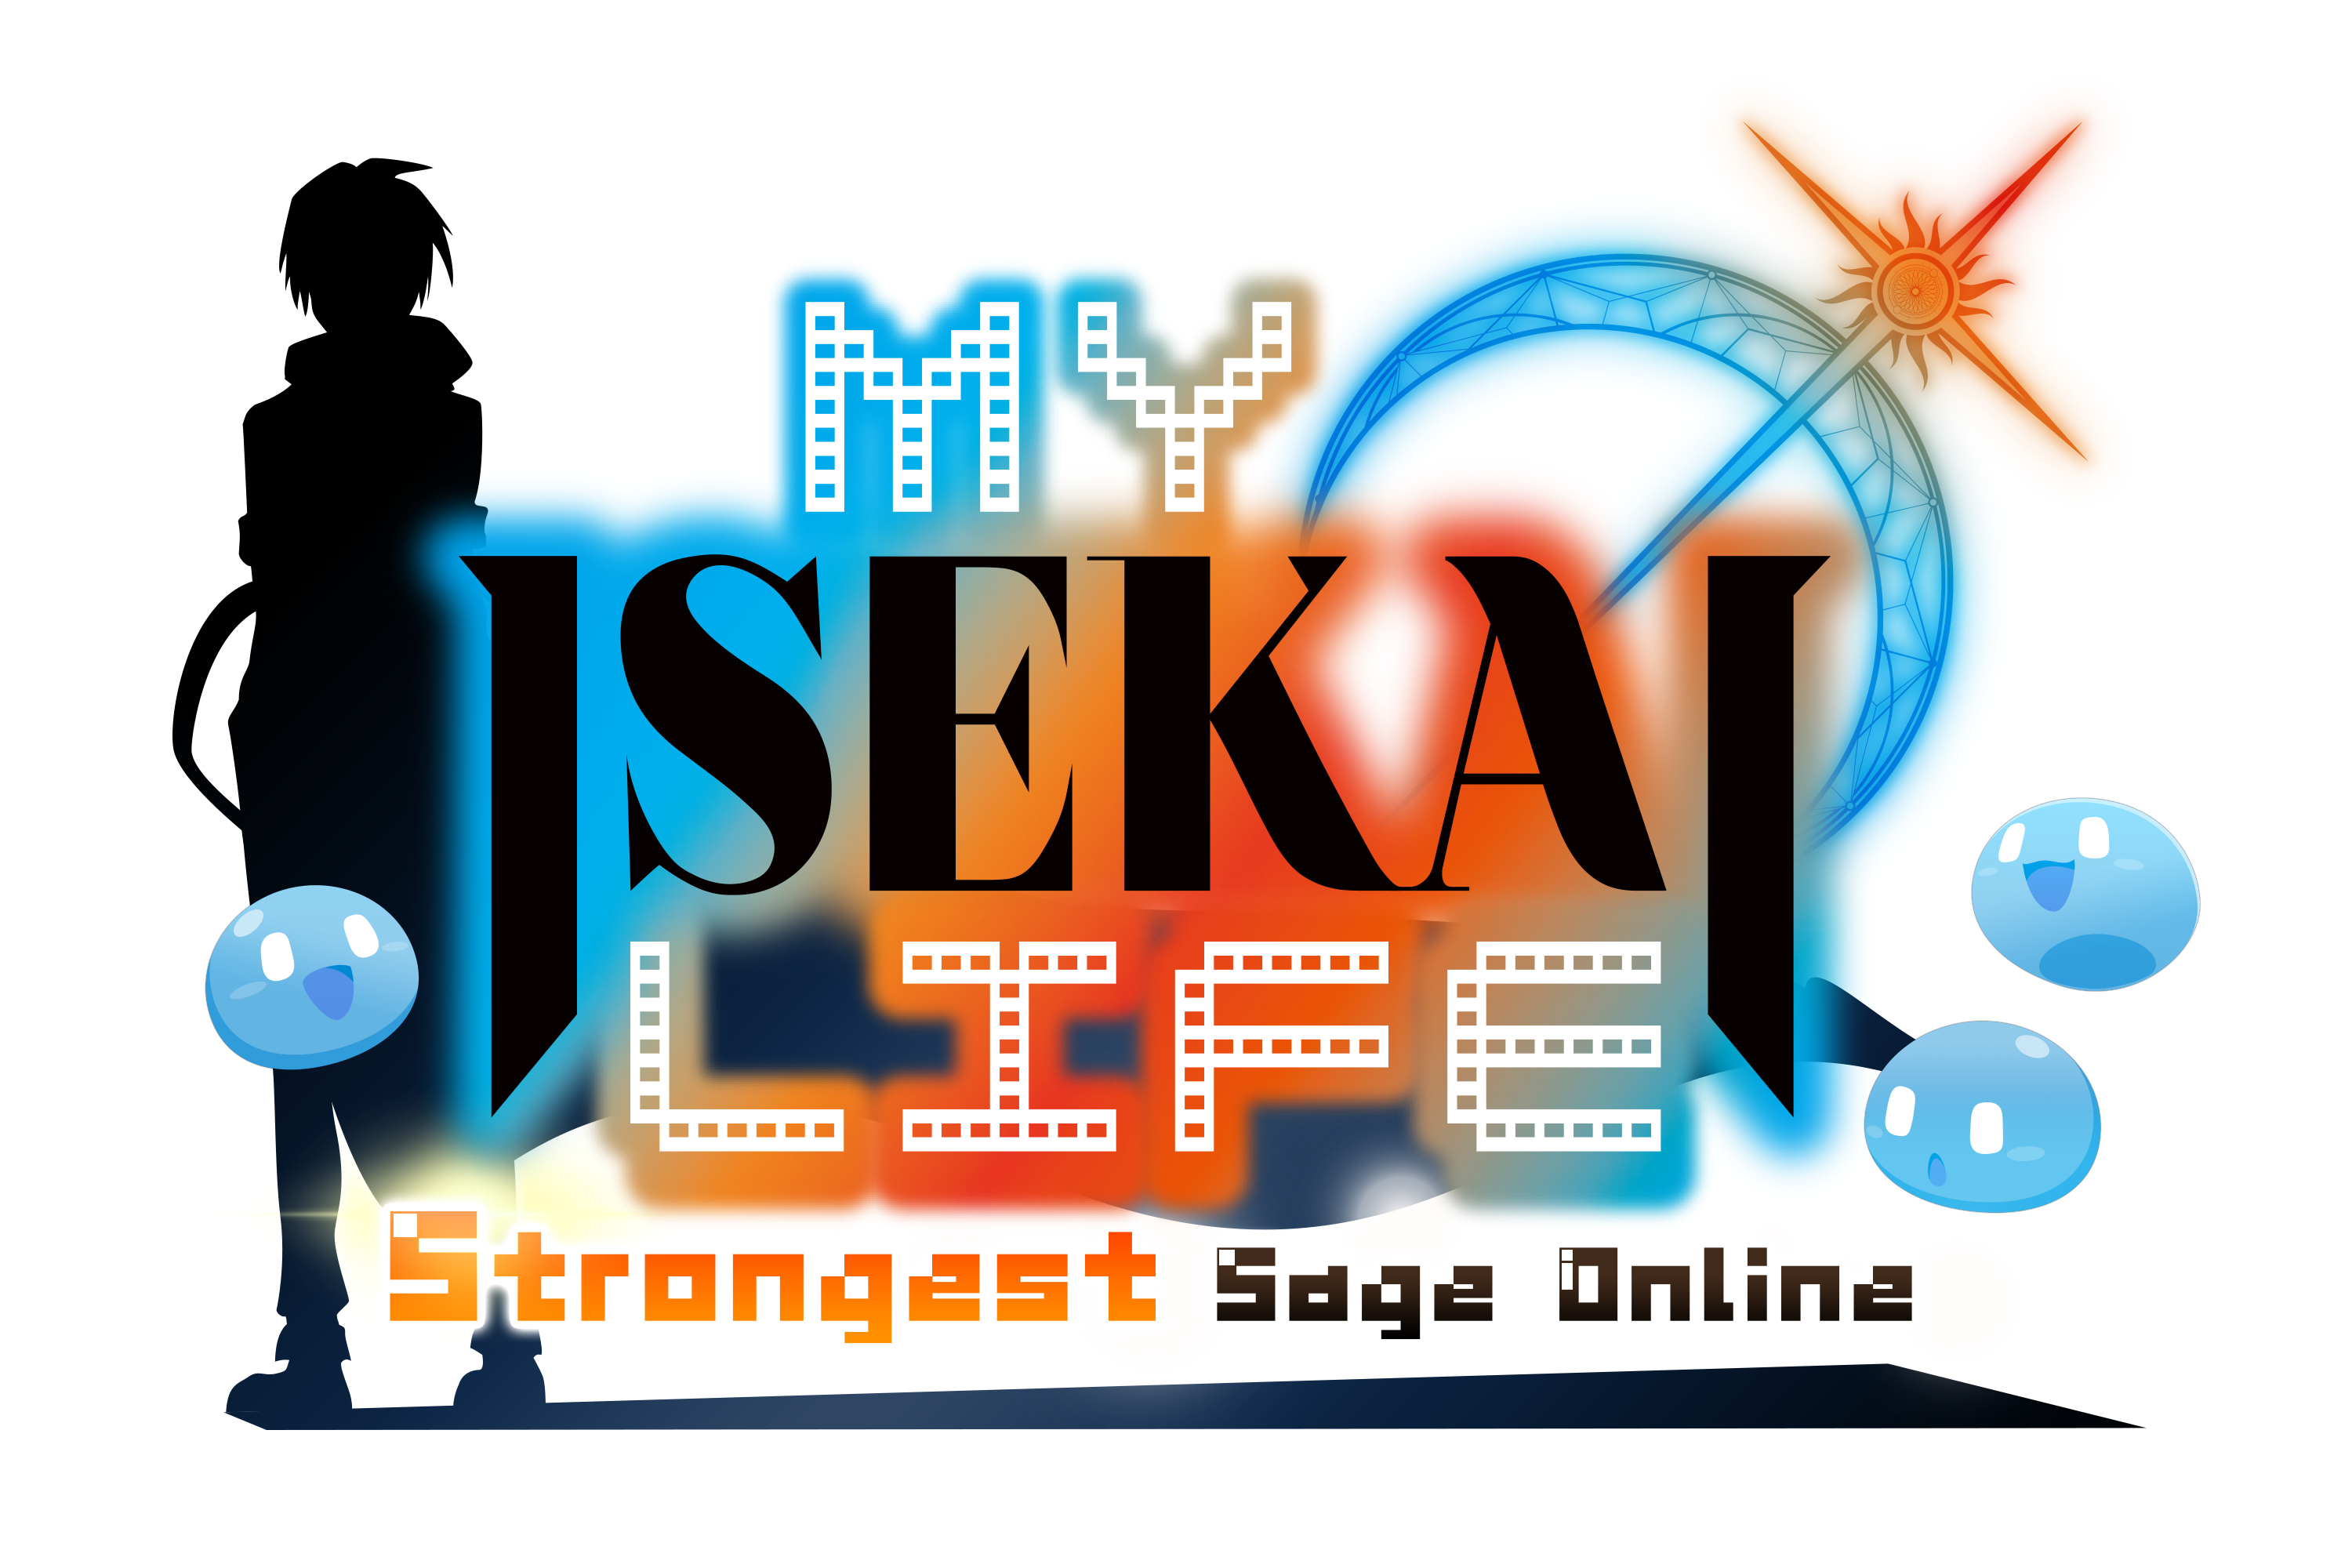 My Isekai Life: Strongest Sage Online Officially Launches on G123